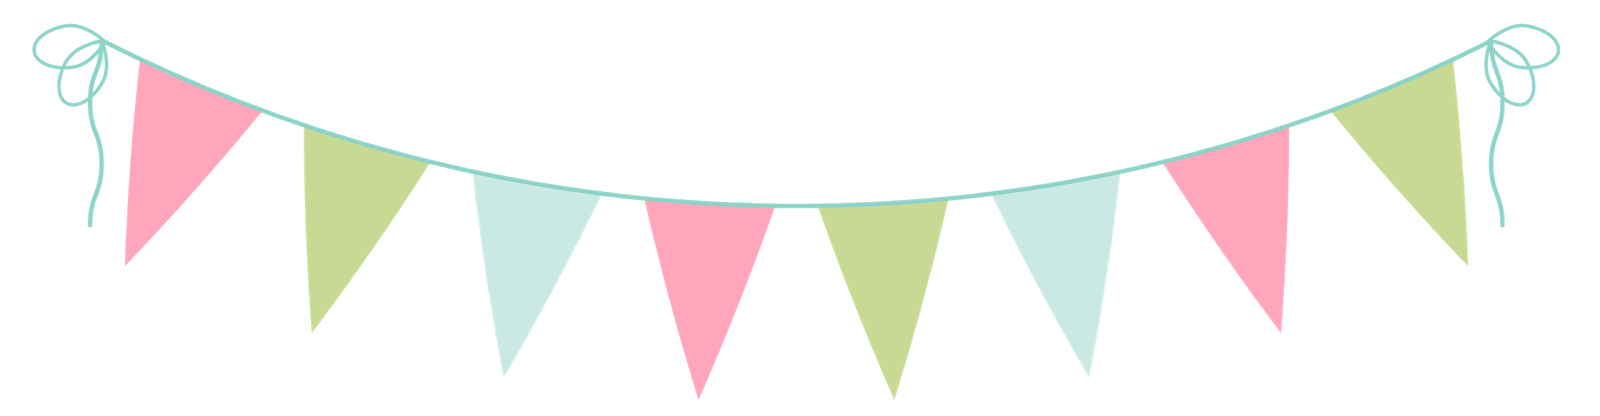 Party Bunting Clip Art - ClipArt Best